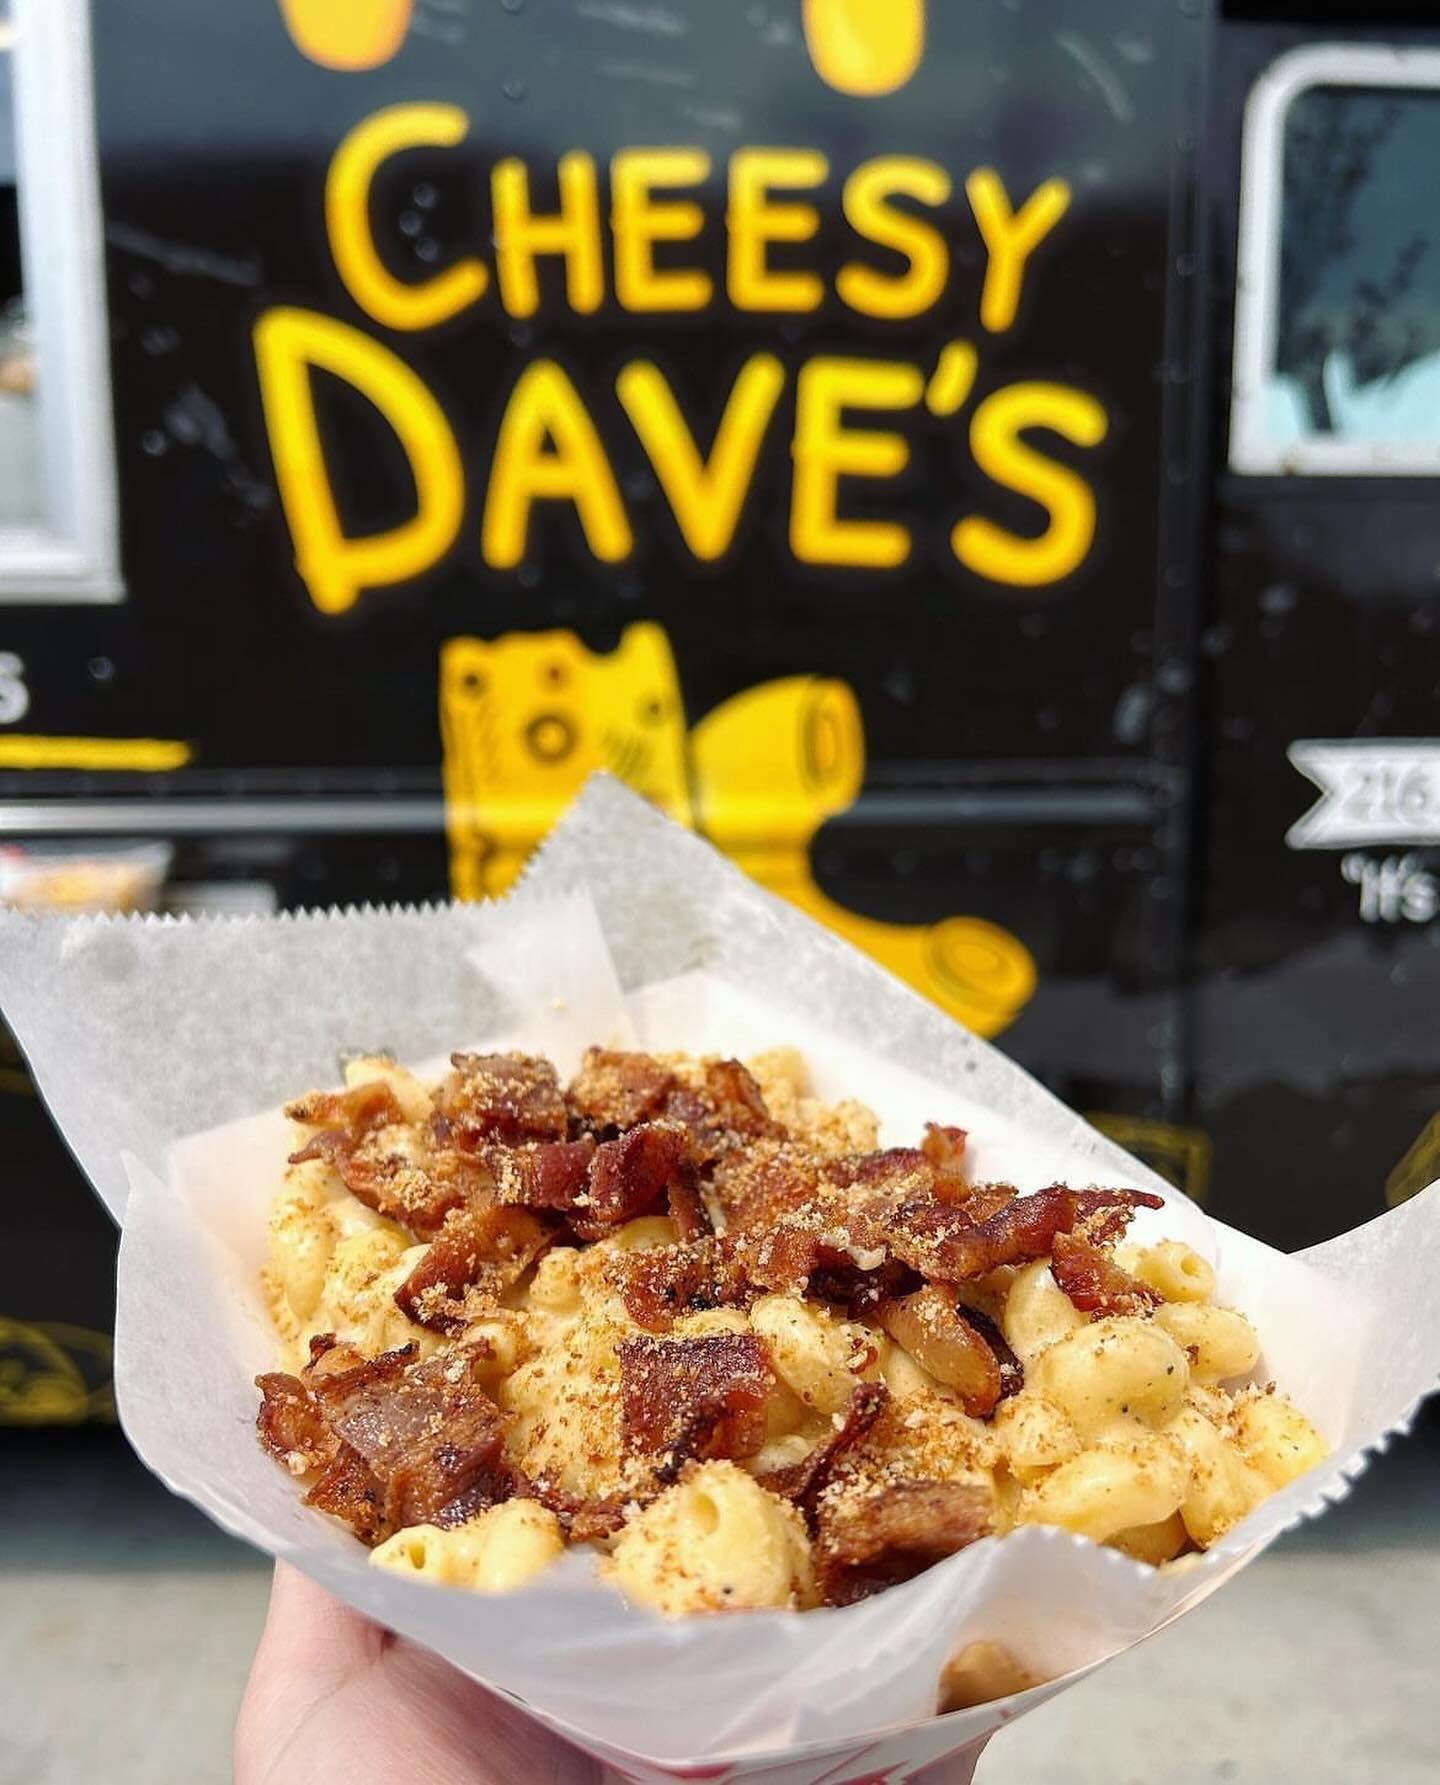 Come Sunday Funday with us!!
@cheesydaves 11am-3pm and @dawgbowlfoodtruck 11am-10pm!